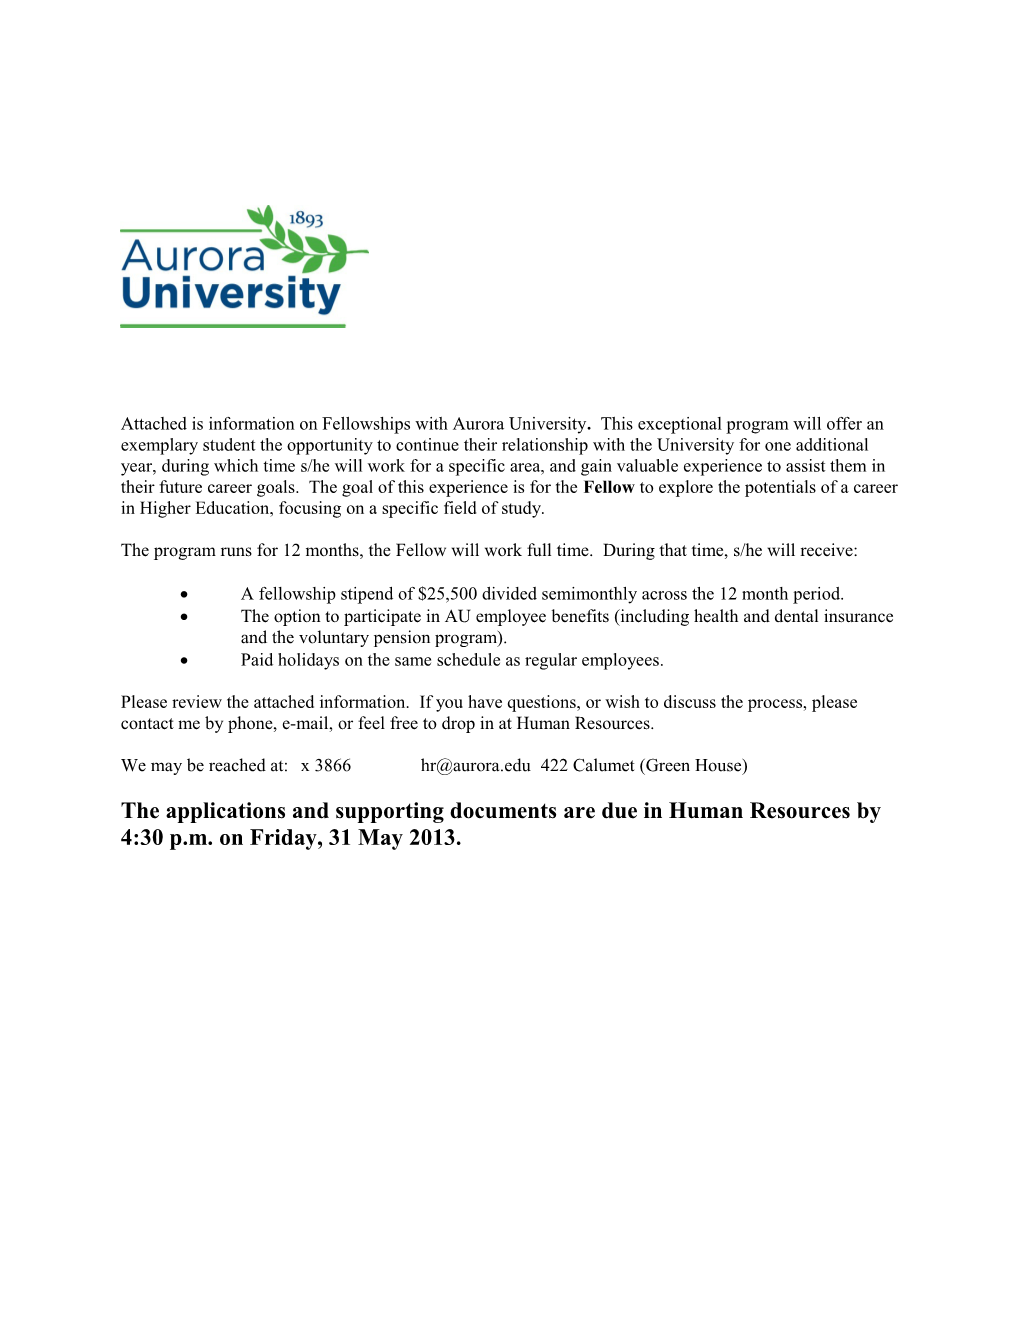 Attached Is Information on Fellowships with Aurora University. This Exceptional Program